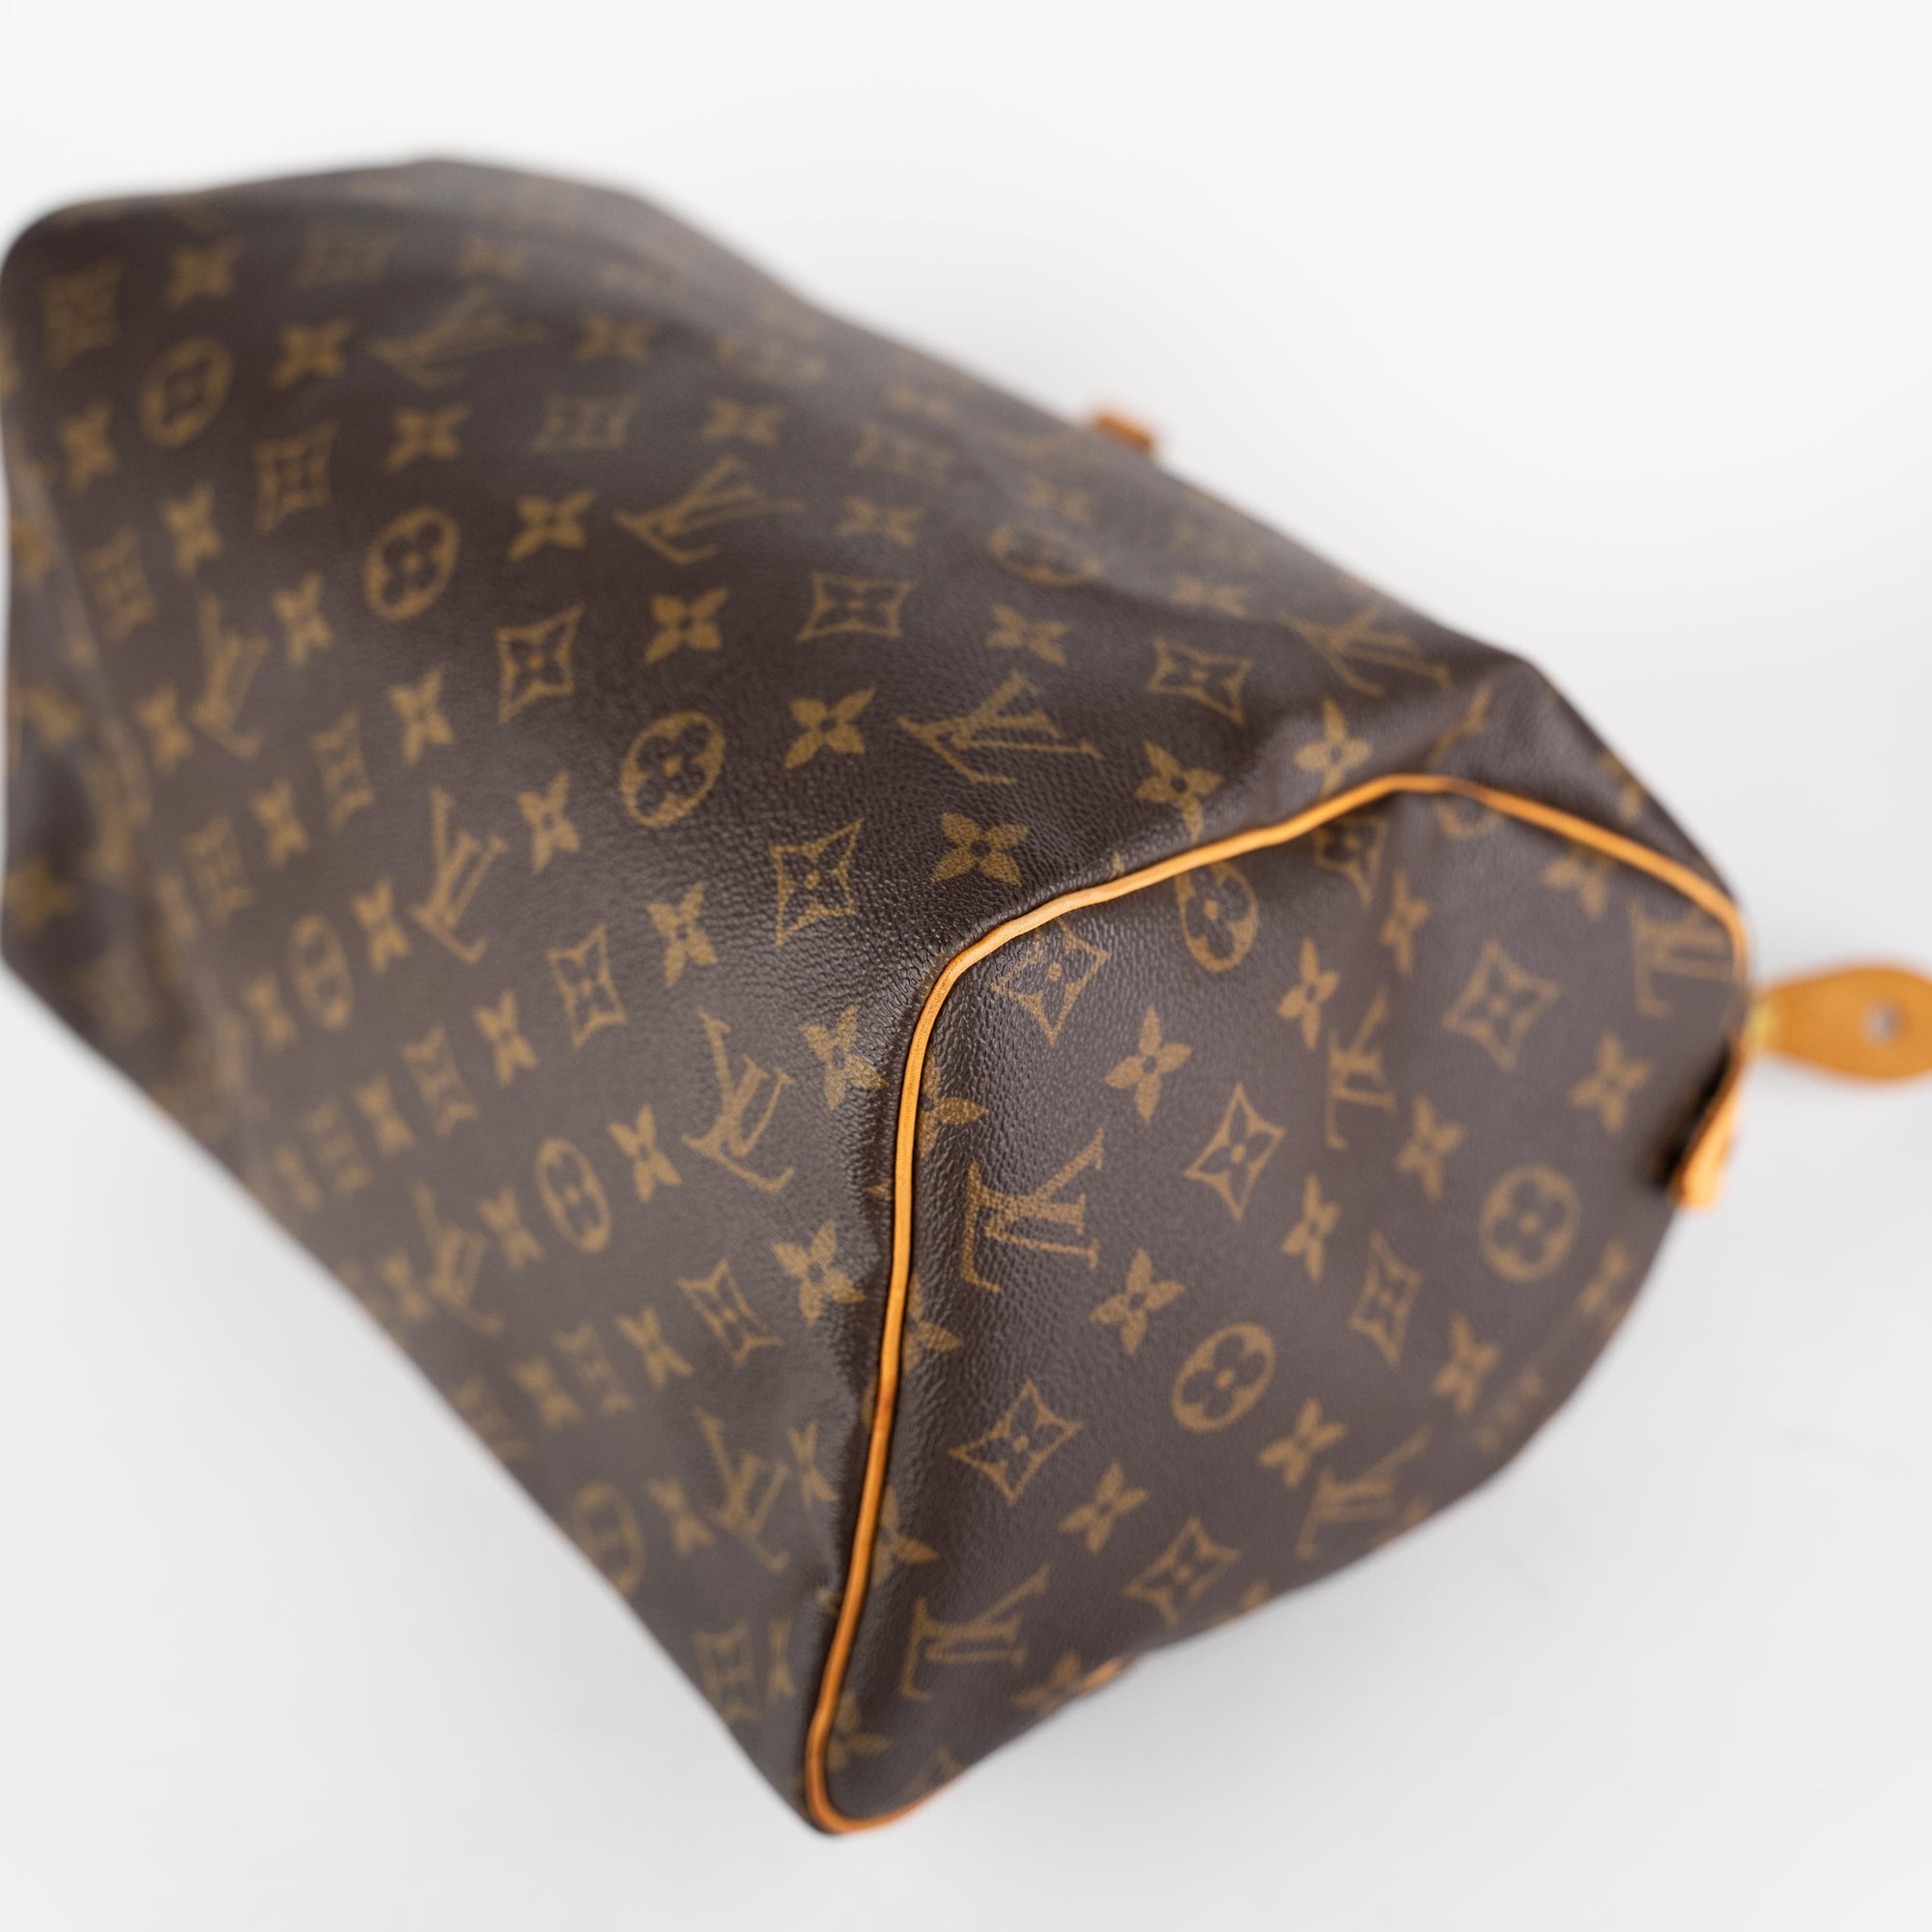 What Size Is Lv Speedy 30  Natural Resource Department